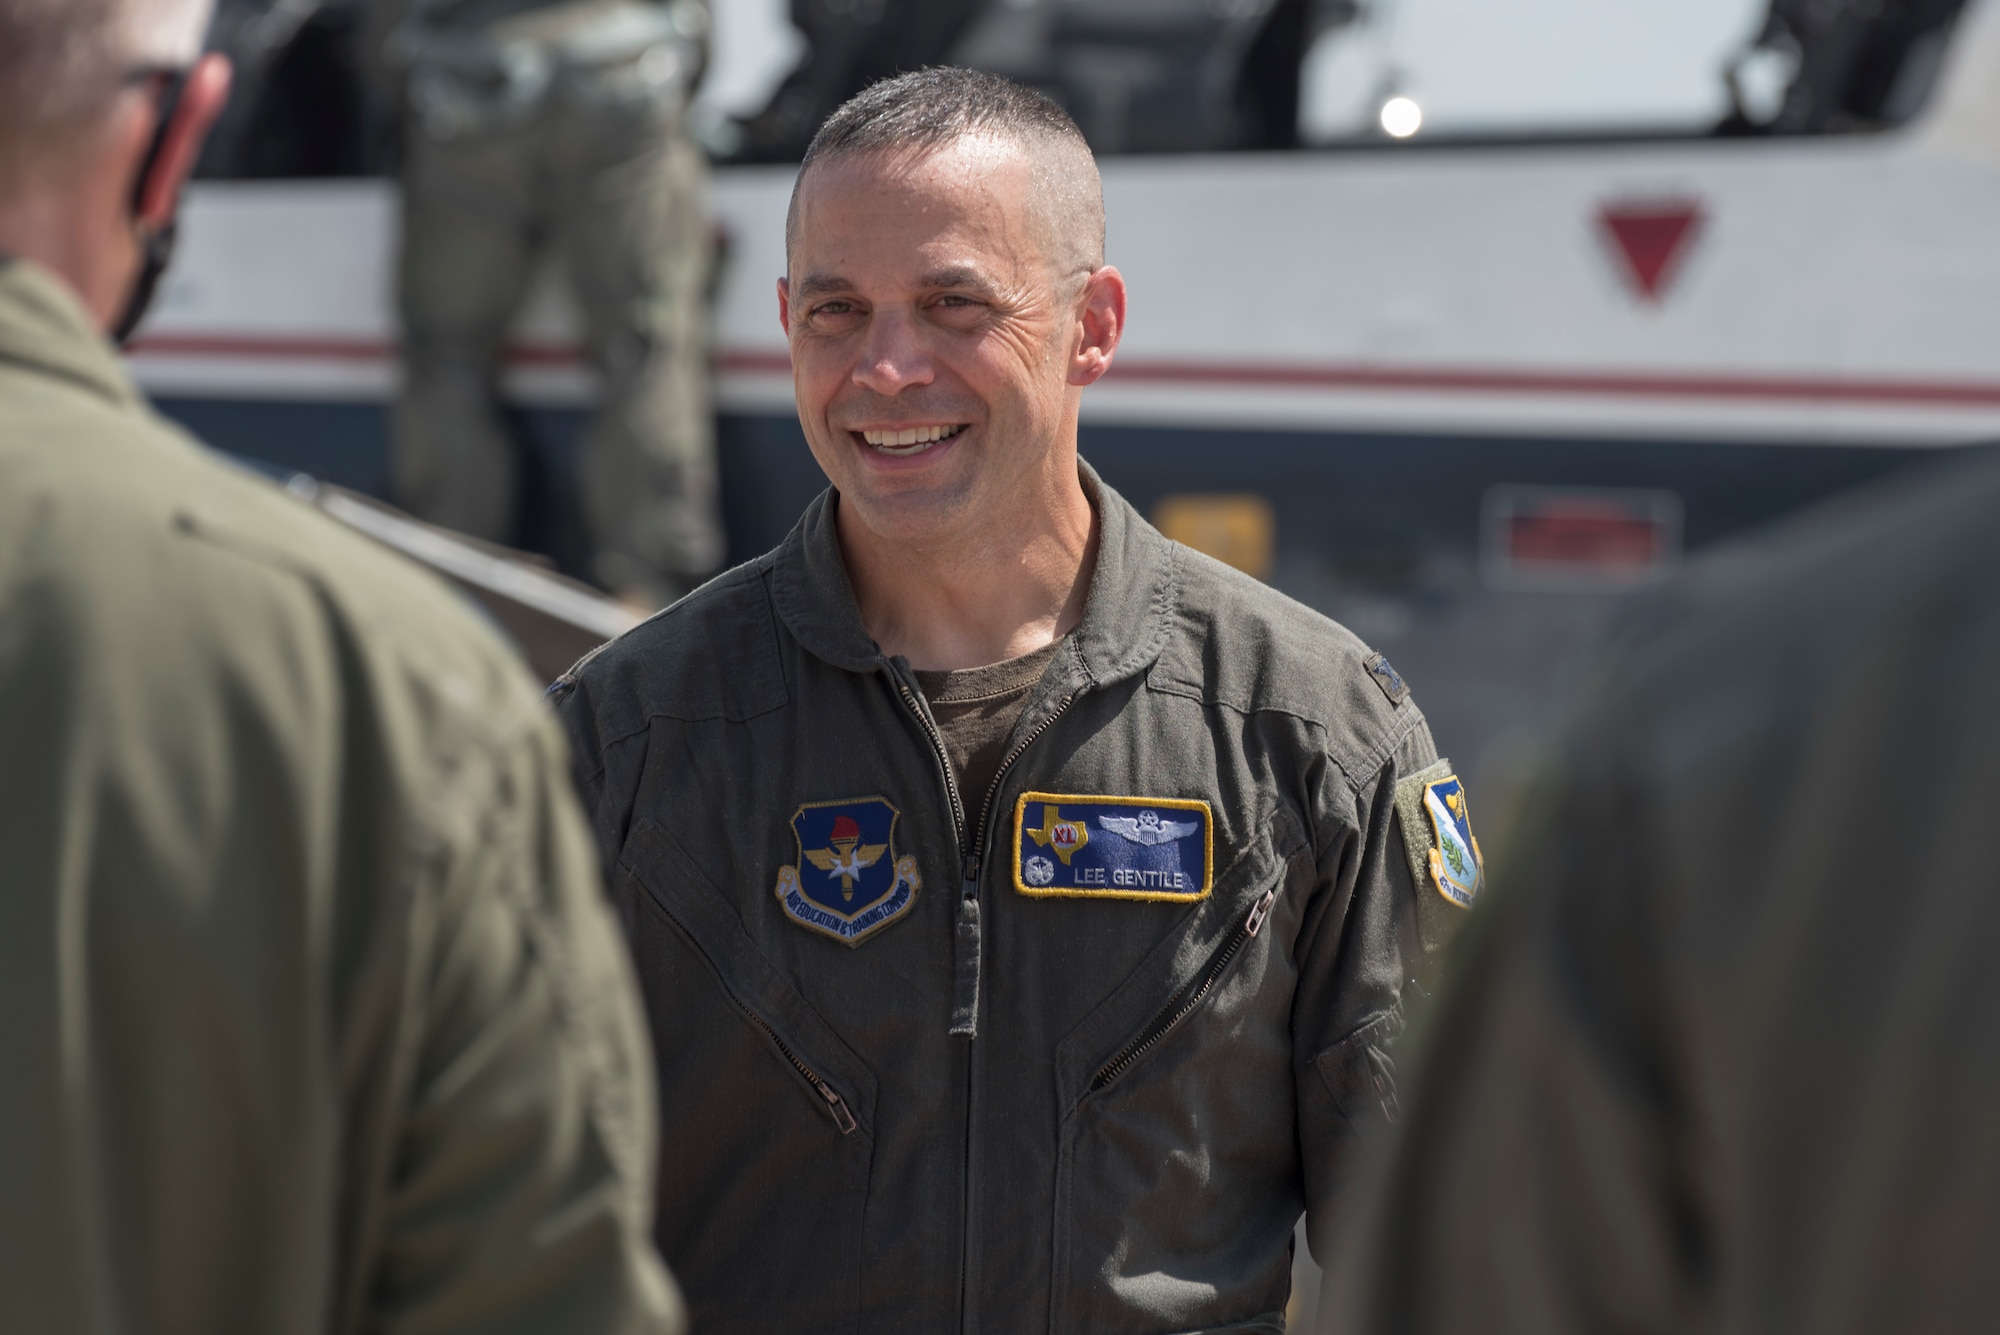 Col. Lee Gentile, 47th Flying Training Wing commander, says farewells to members of Team XL after his fini flight, July 17, 2020 at Laughlin Air Force Base Texas. His next assignment is Air Command and Staff College commandant at Maxwell AFB, Alabama. (U.S. Air Force photo by Senior Airman Anne McCready)